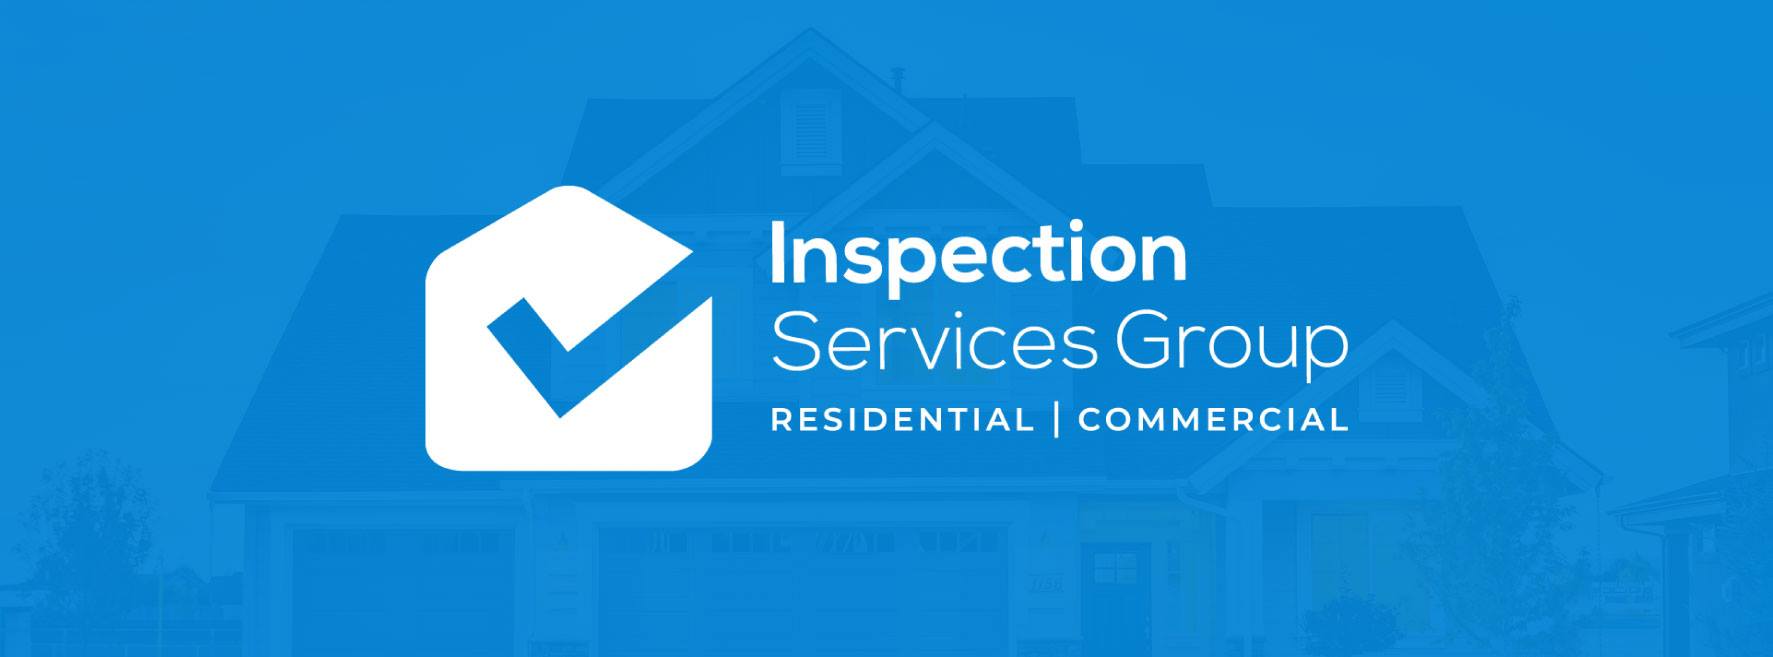 Inspection Services Group Logo